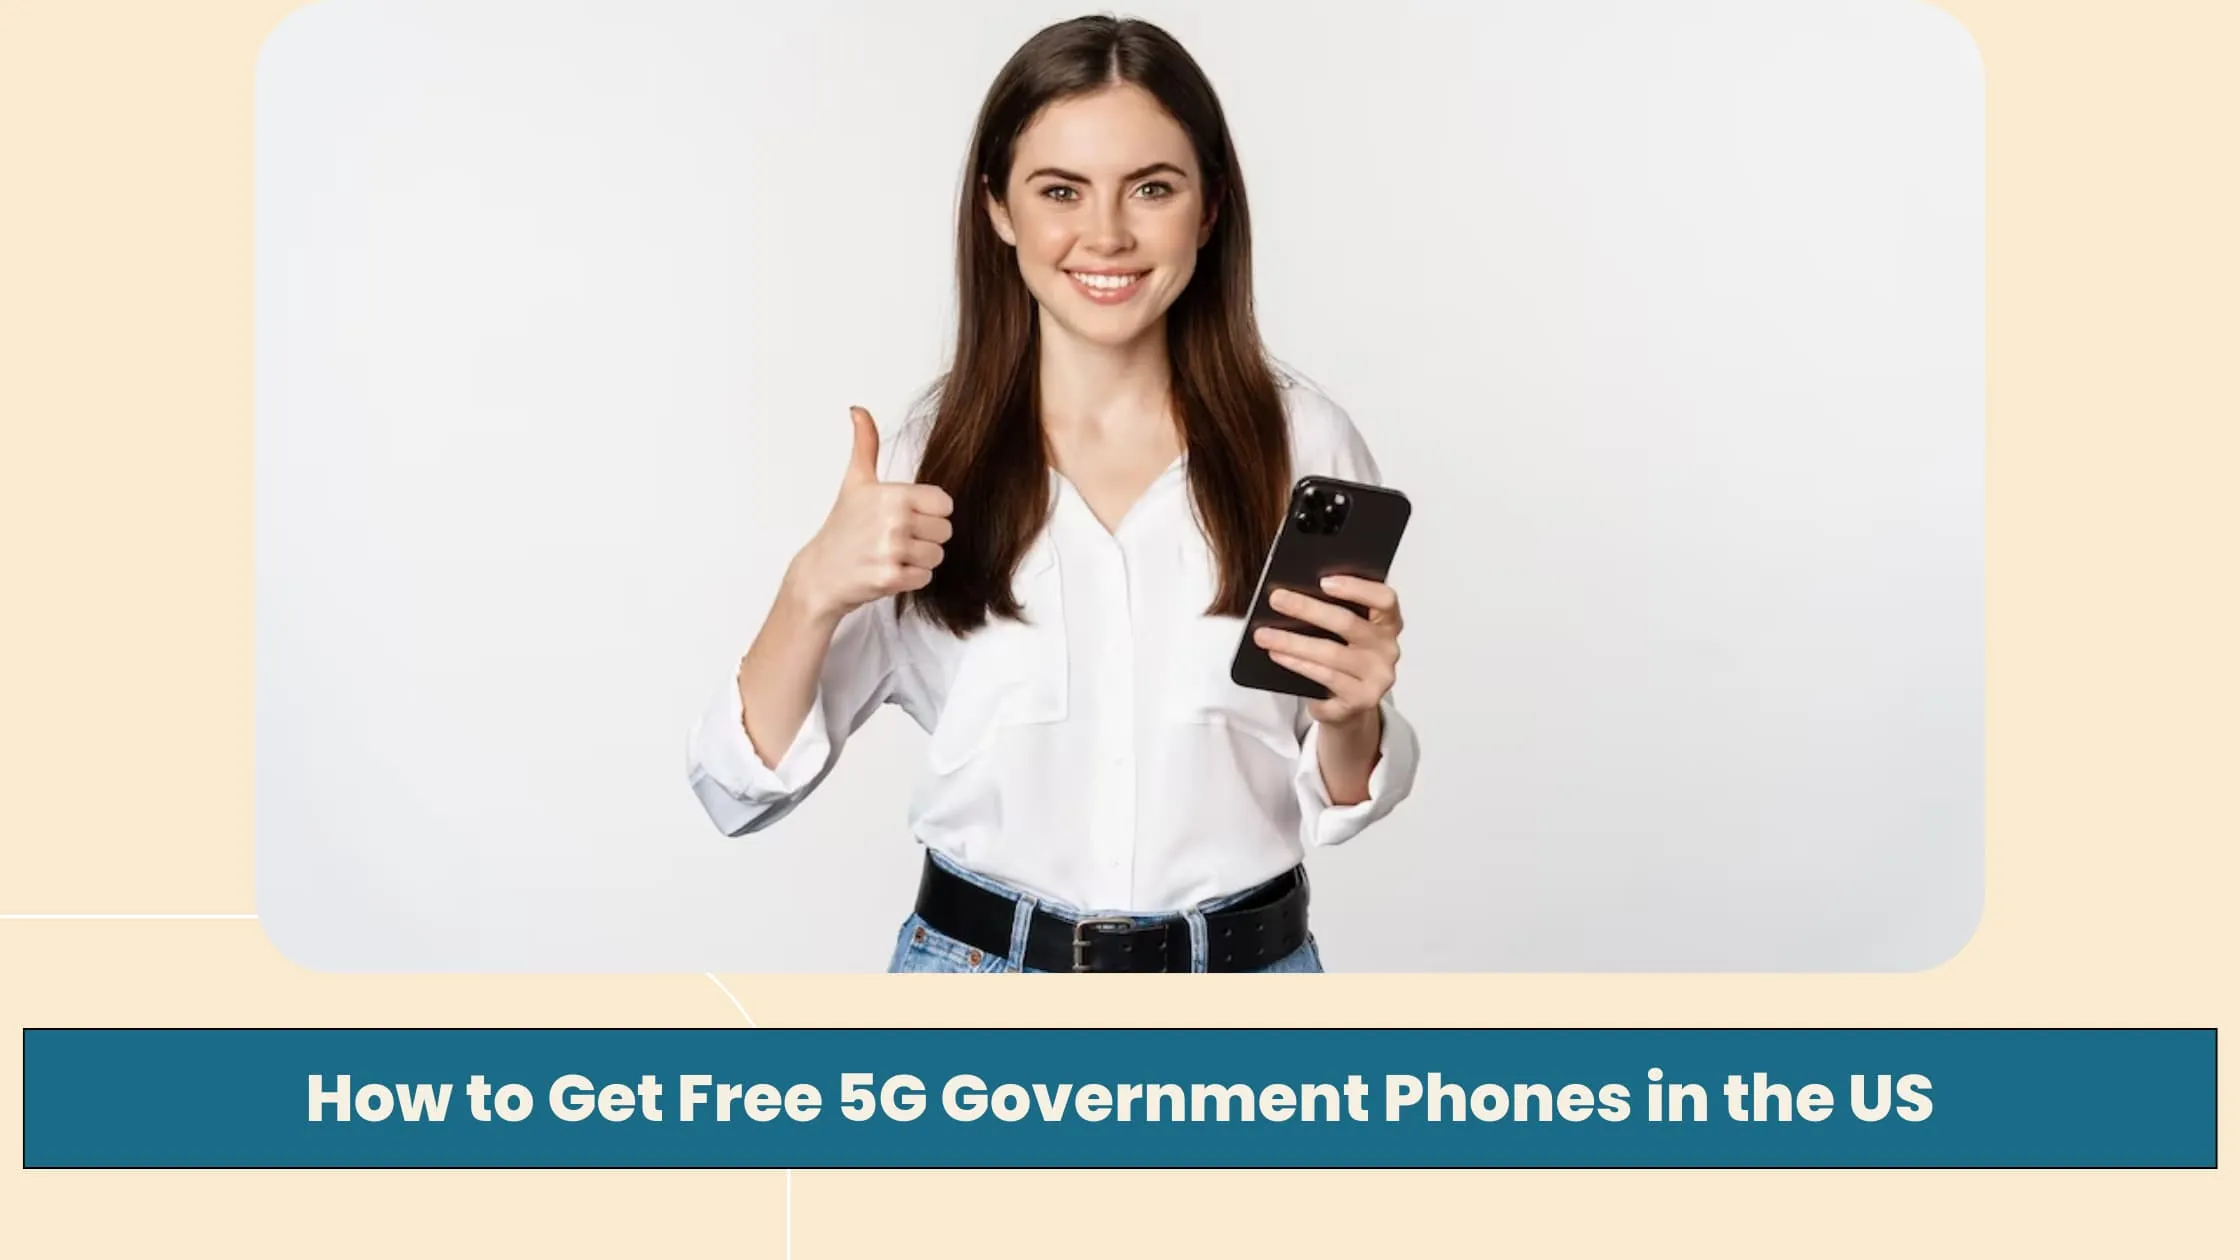 How to Get Free 5G Government Phones in the US